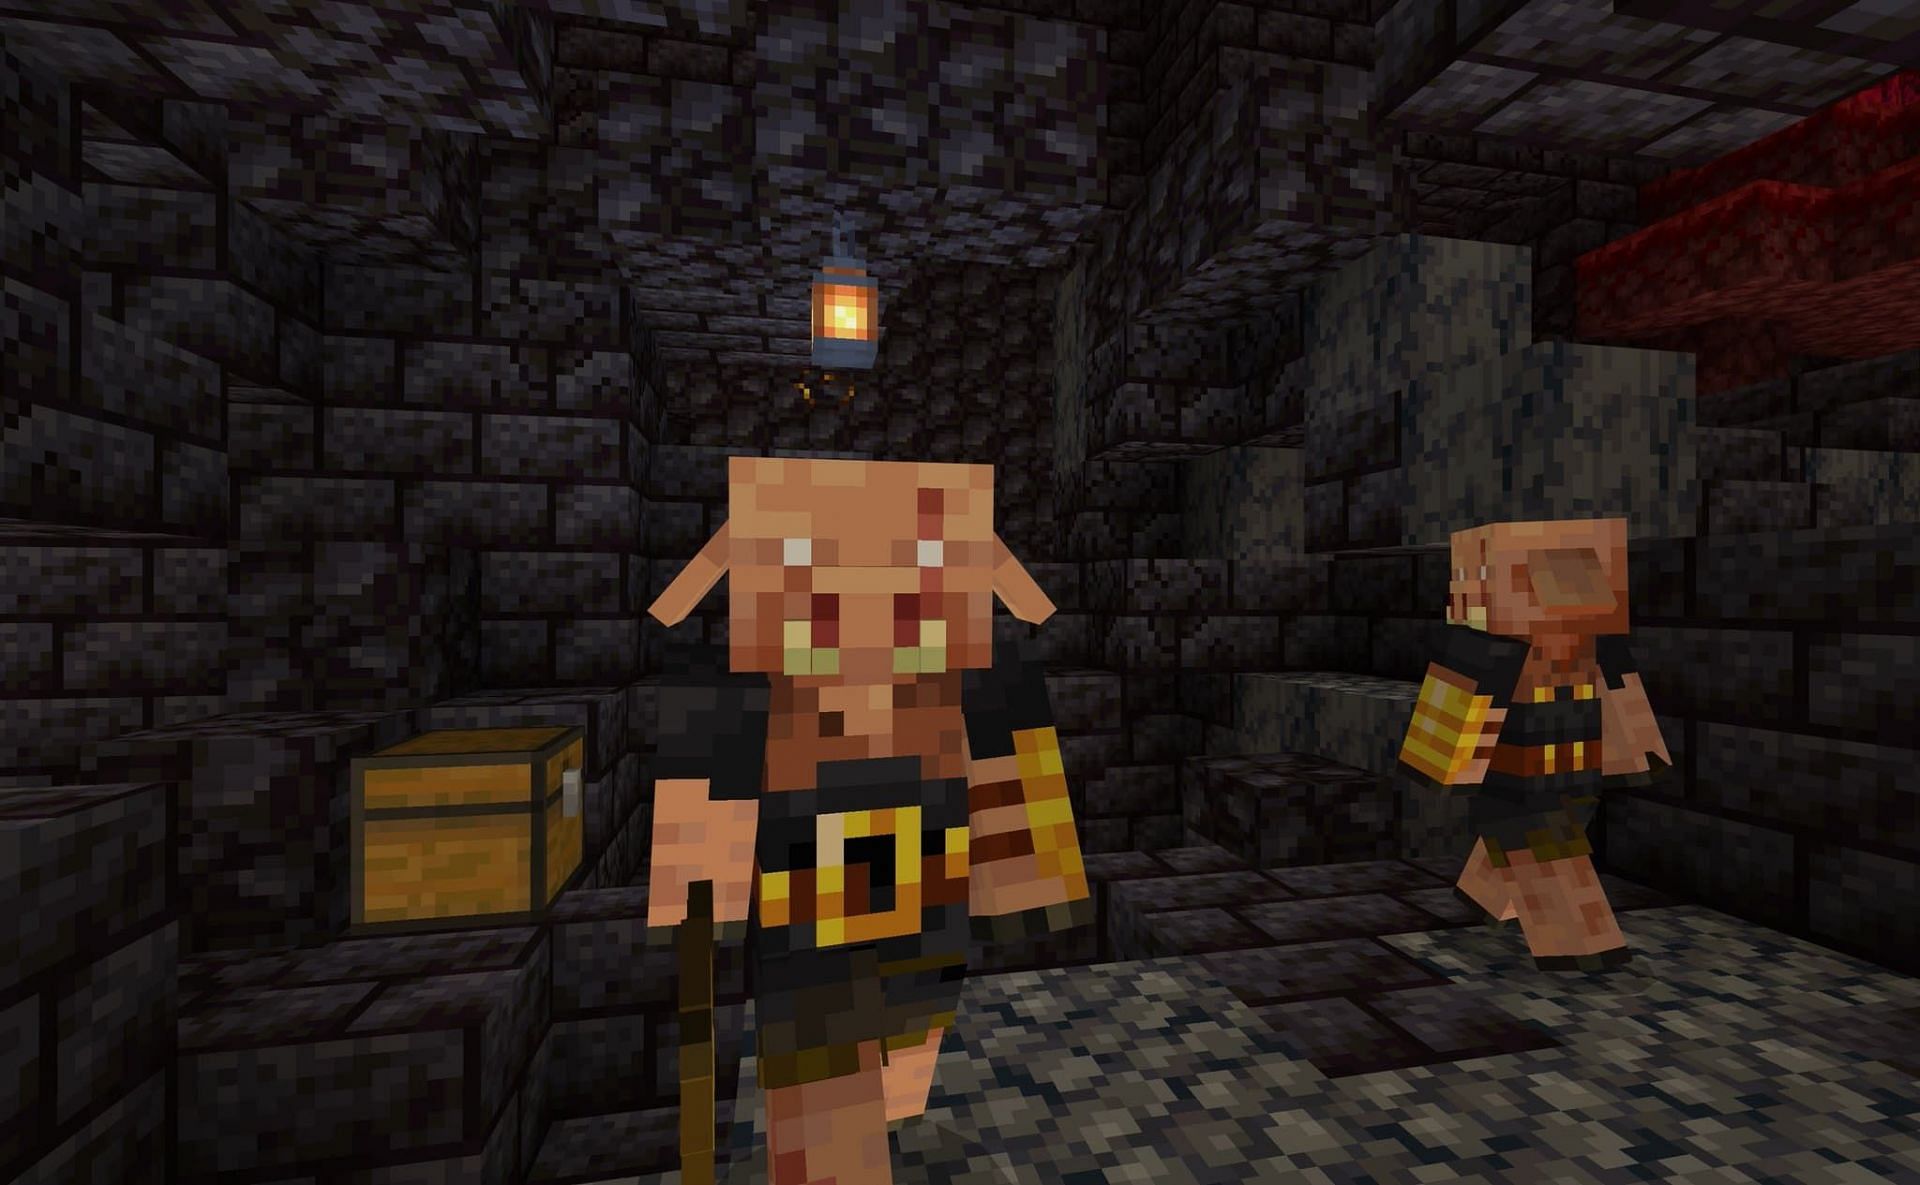 An example of a Piglin Brute (Image via Minecraft)